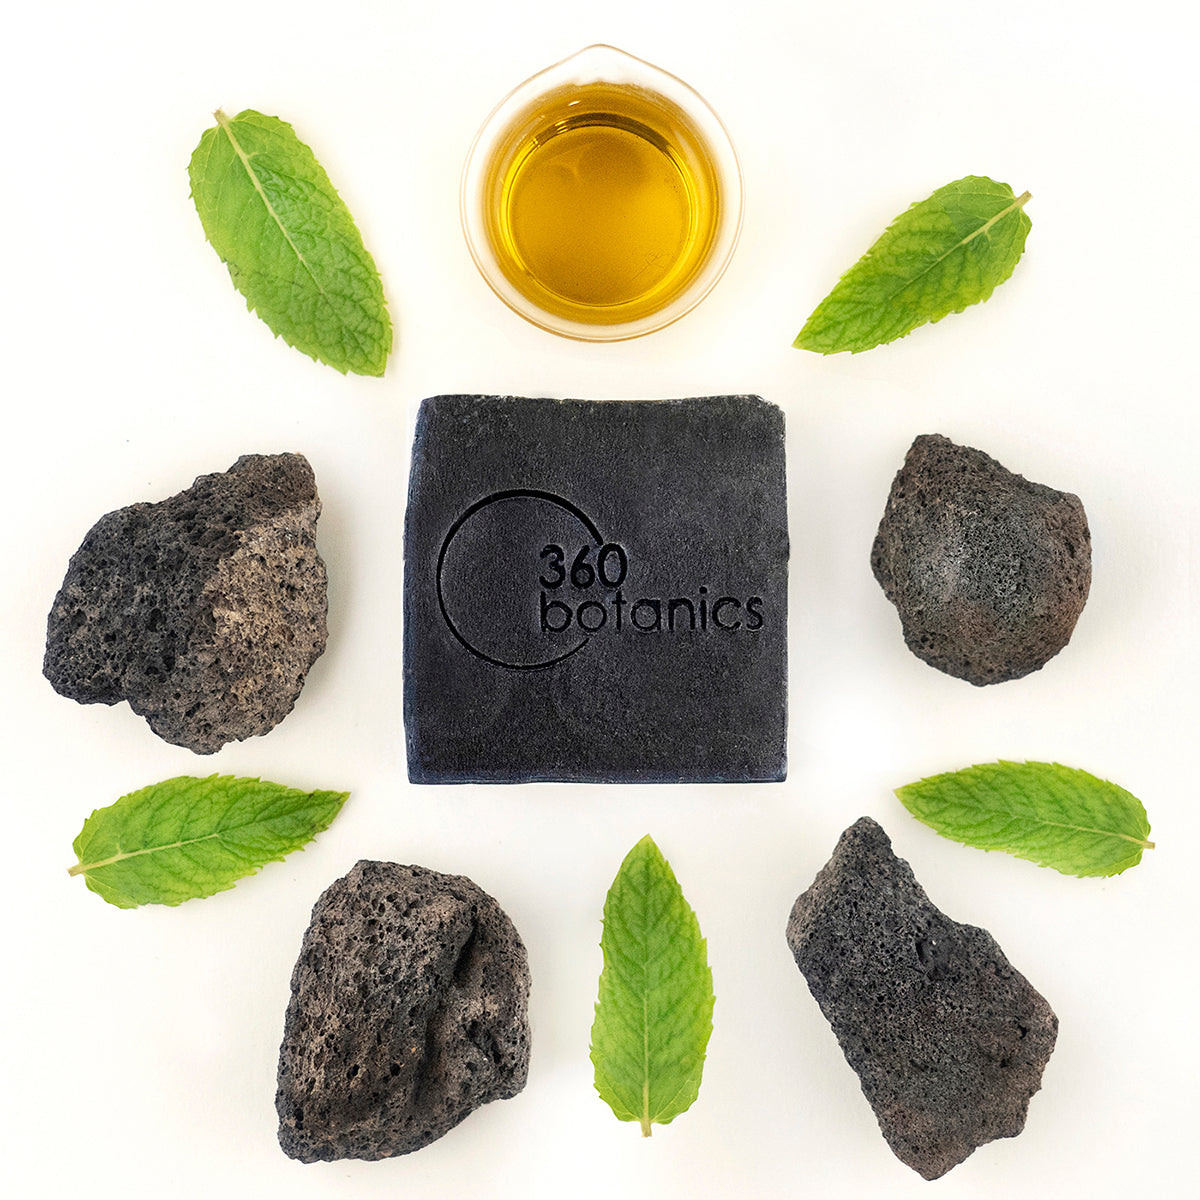 A flat lay image featuring a black charcoal soap bar with the "360 Botanics" logo at the center, surrounded symmetrically by three pieces of volcanic rock, a small bowl of liquid, and fresh green leaves on a white background.